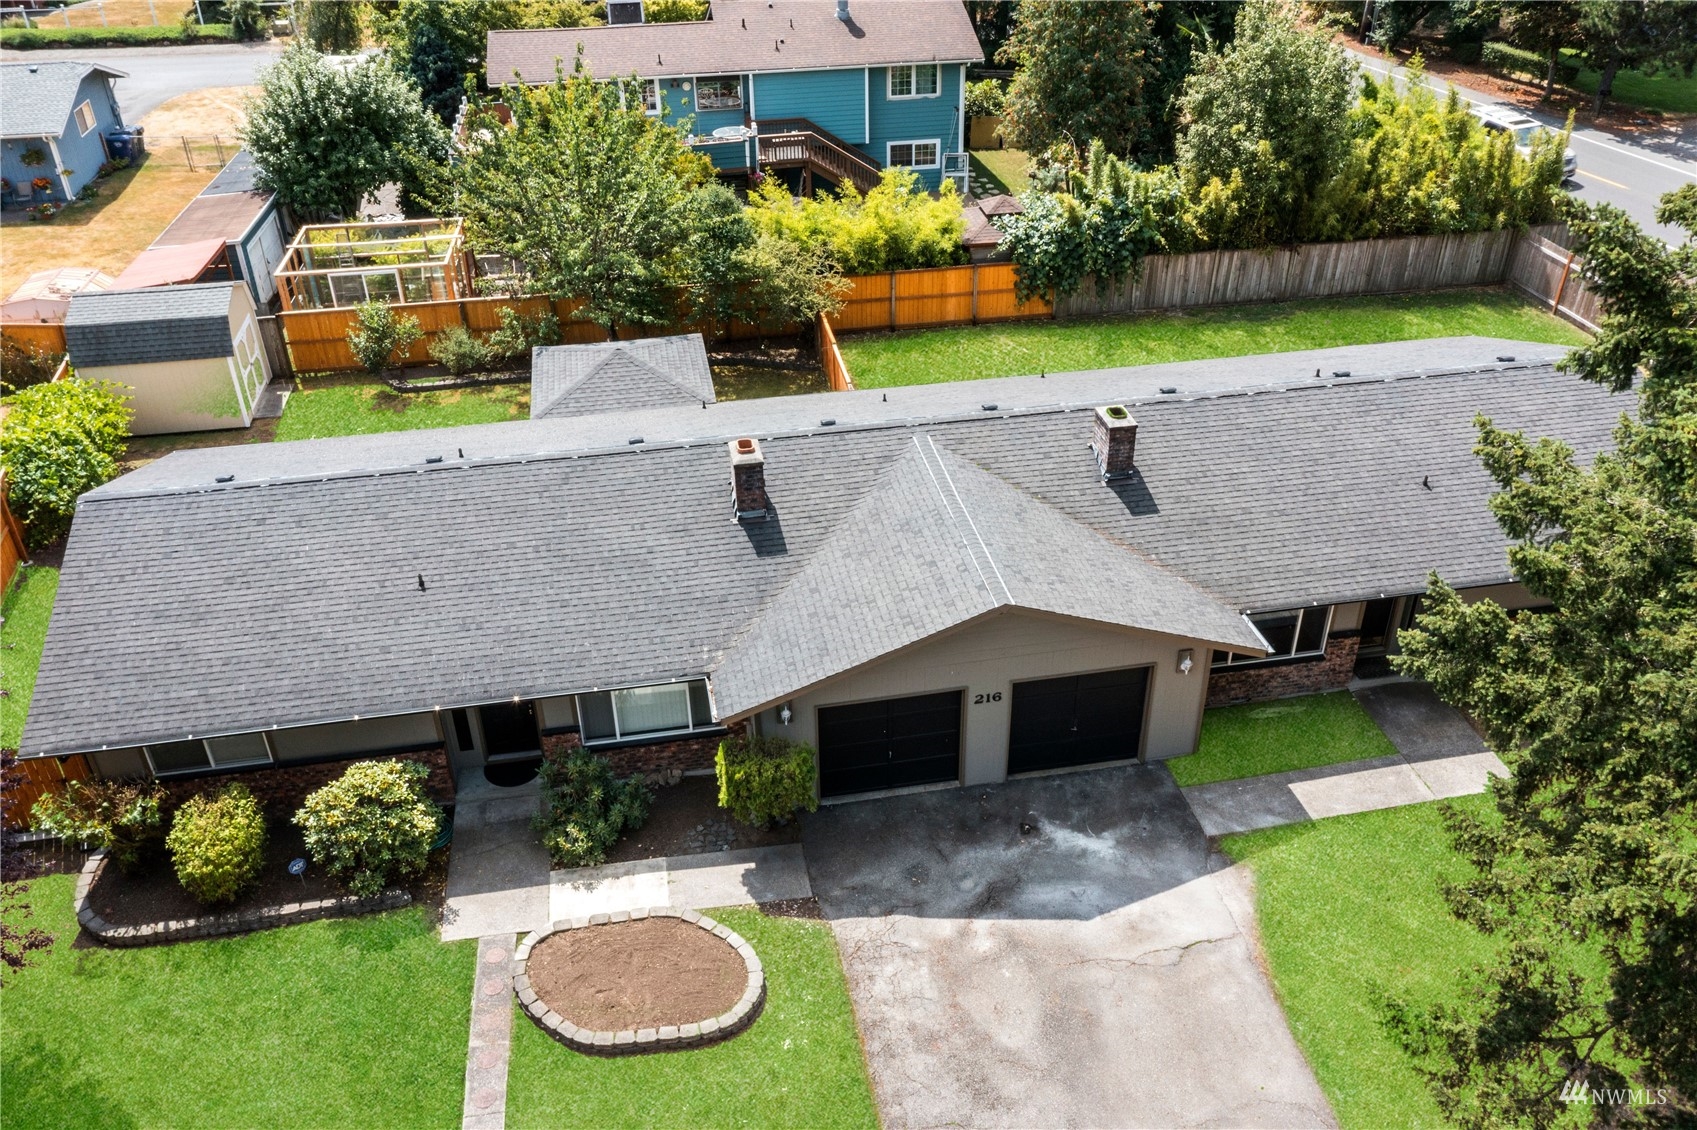 an aerial view of a house with a yard and a sitting area